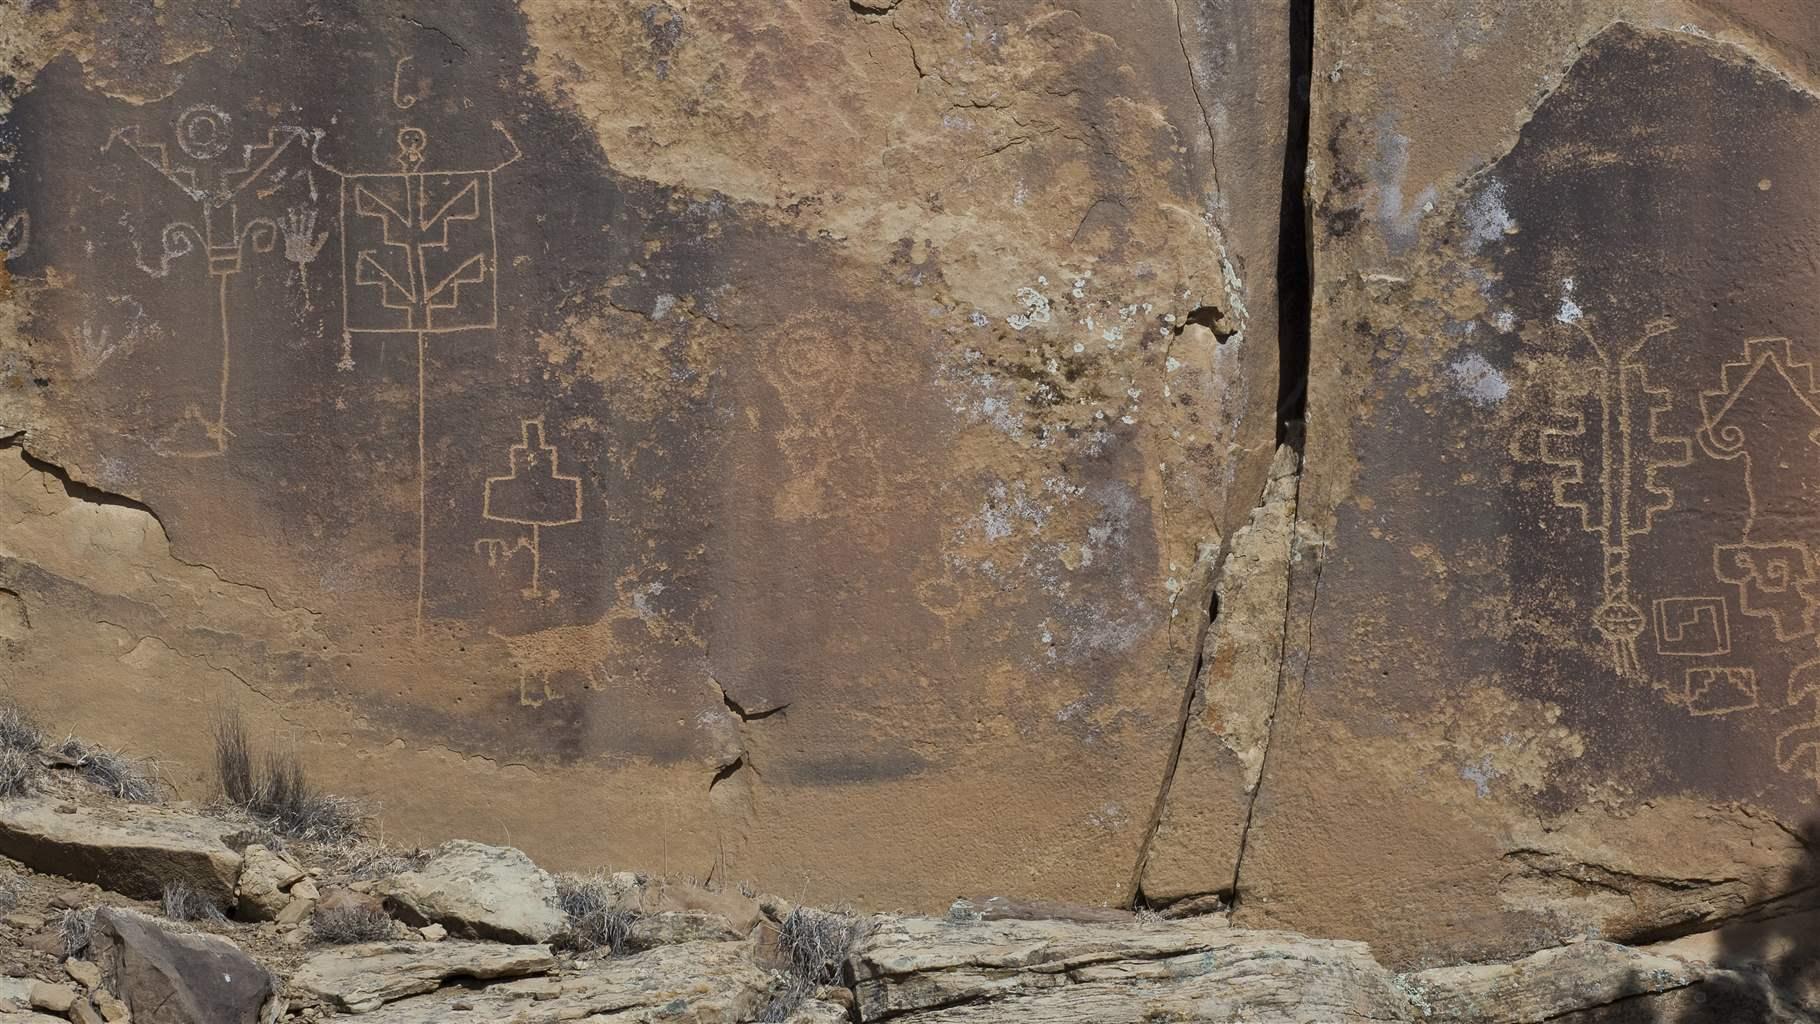 Various petroglyphs are visible, carved into a large flat rock face. The depictions include geometric patterns, wildlife, and spirals. Some native grasses and shrubs are present in the foreground among rocks.Various petroglyphs are visible, carved into a large flat rock face. The depictions include geometric patterns, wildlife, and spirals. Some native grasses and shrubs are present in the foreground among rocks.